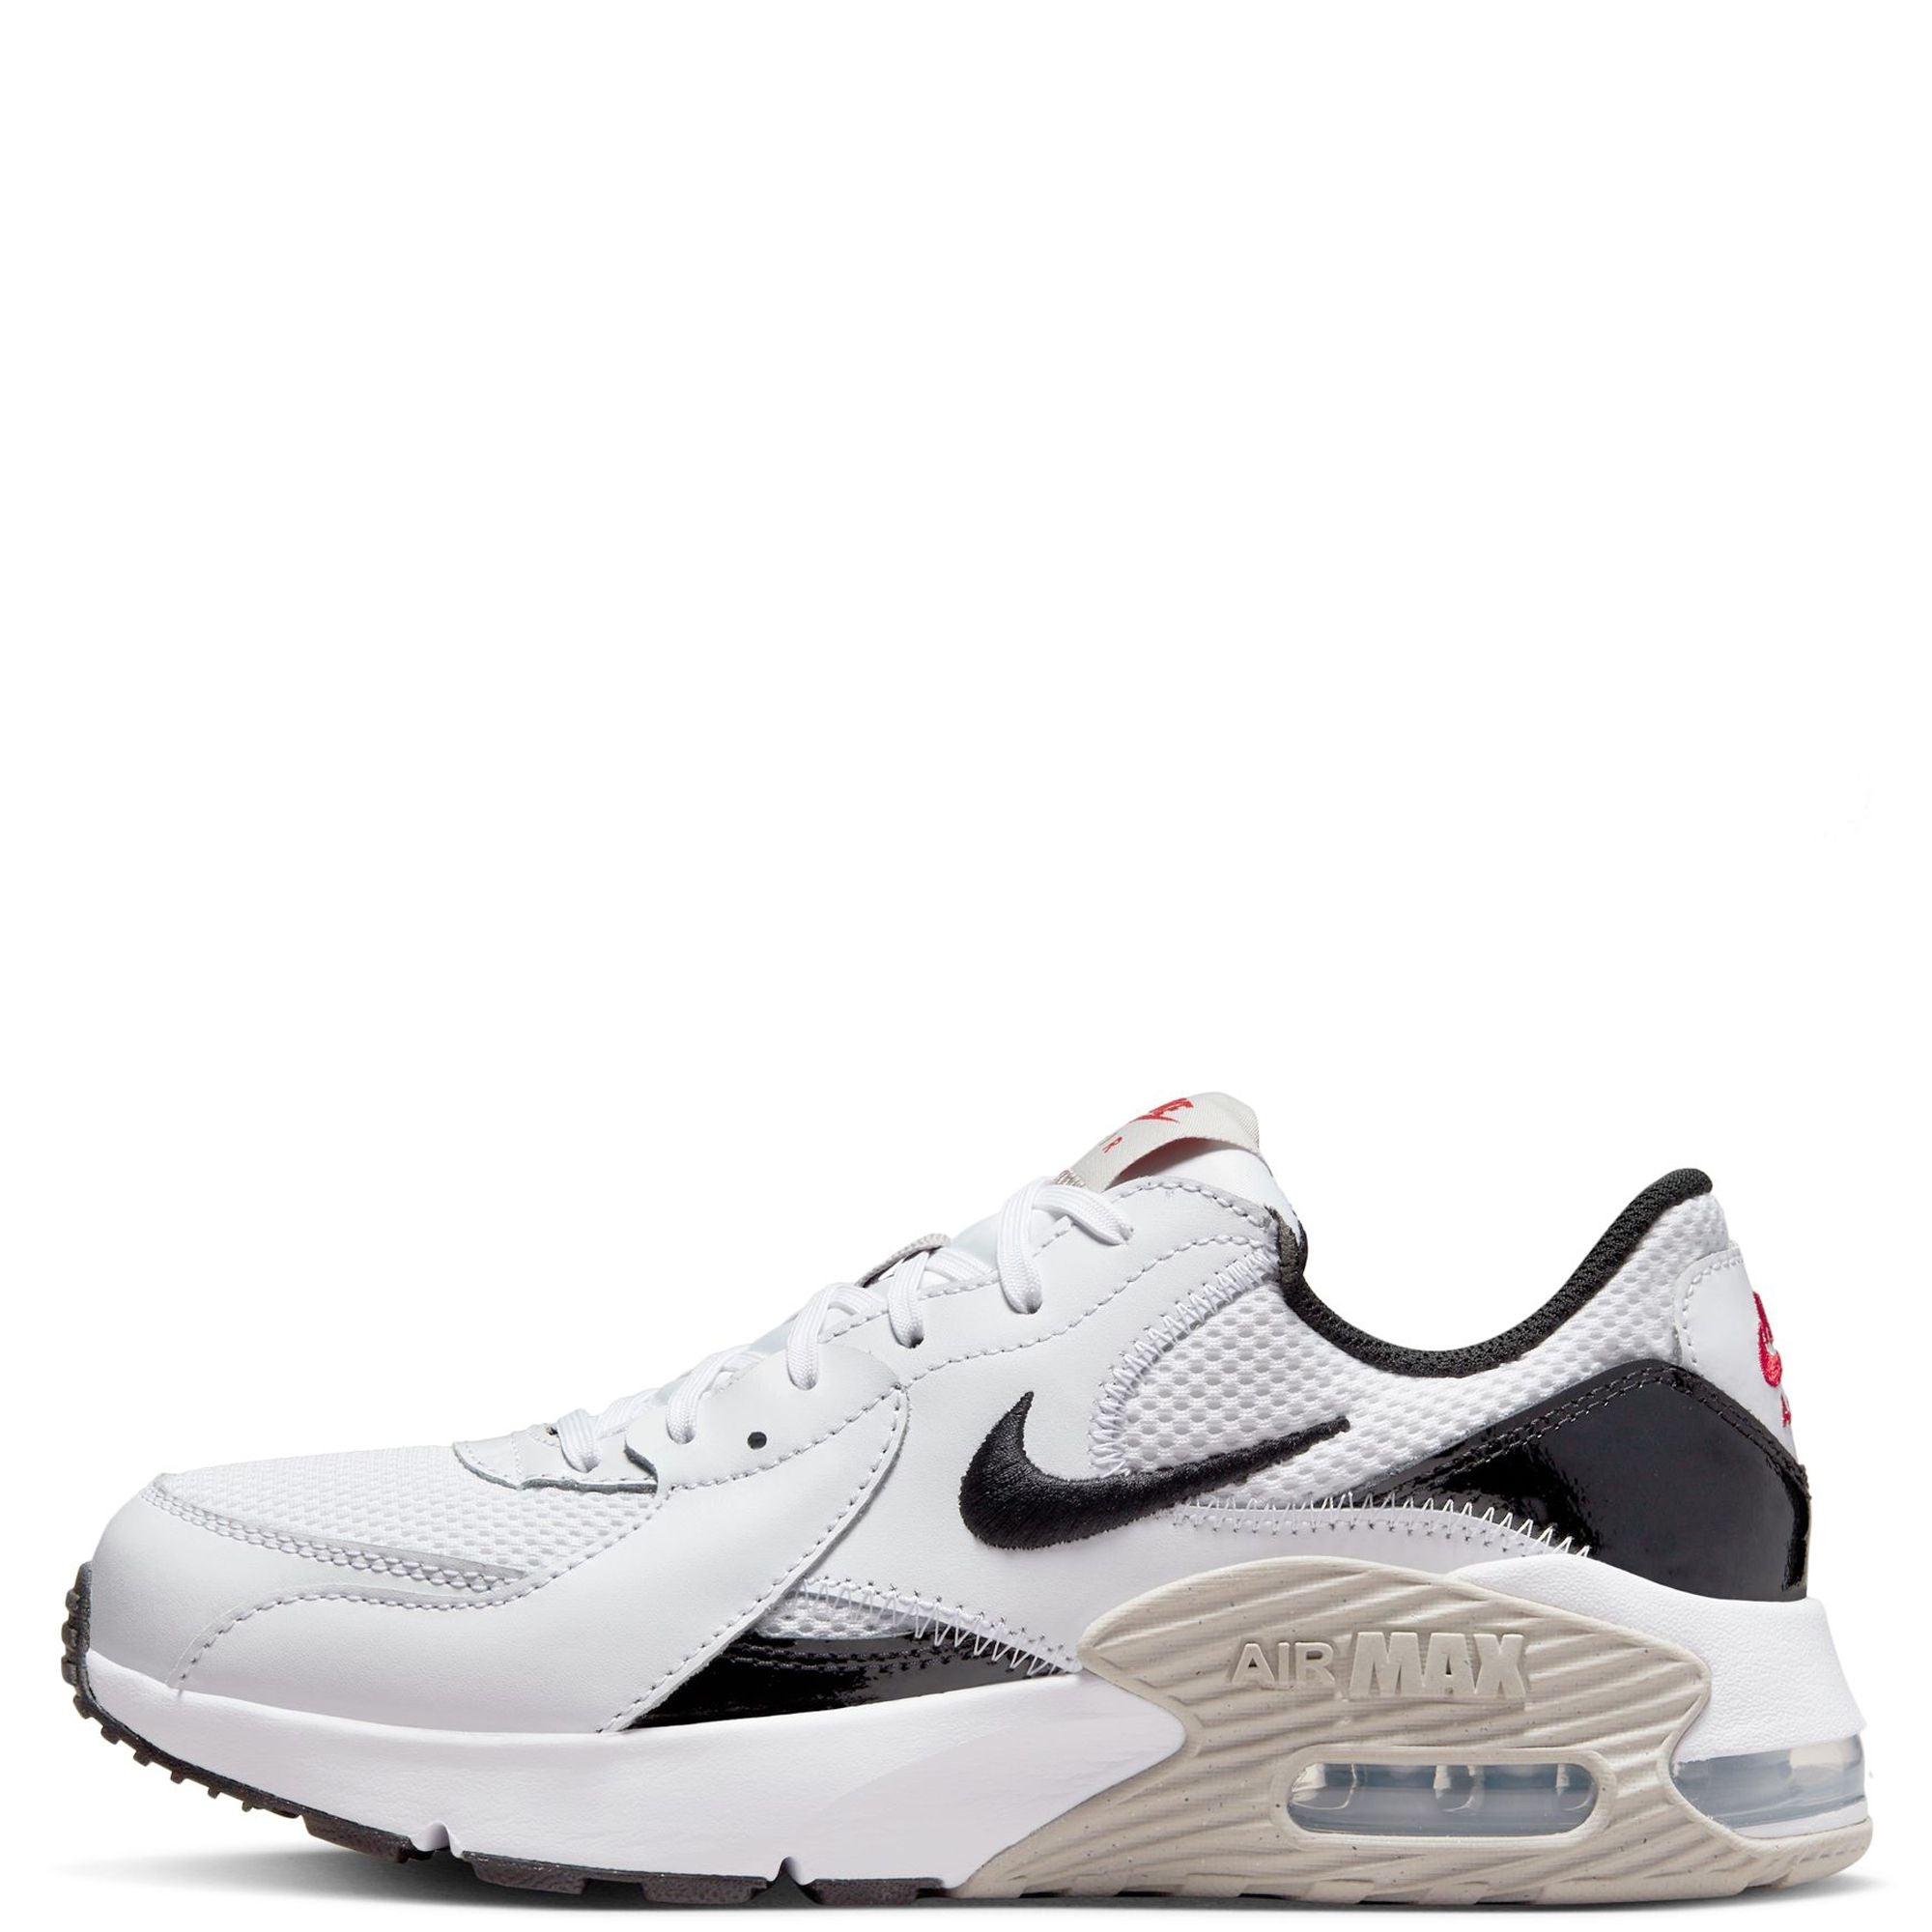 Nike Women's Air Max Excee Shoes White/Black-LT Iron Ore-University Red DR2402 100